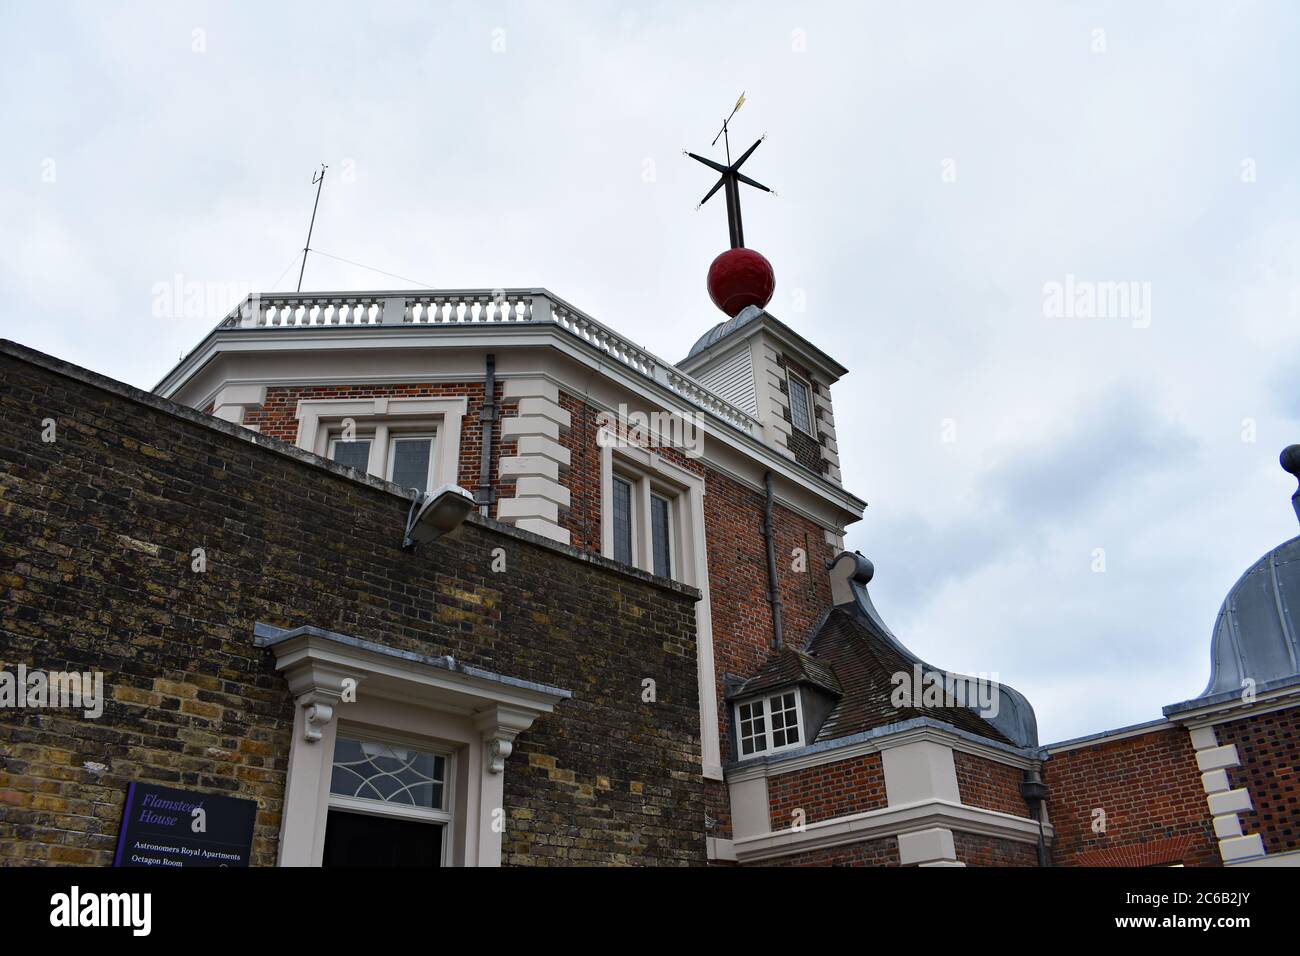 Looking up at the red time ball and weather vane above the Octagon Room and Flamsteed House at the Royal Observatory in Greenwich Park on a cloudy day Stock Photo